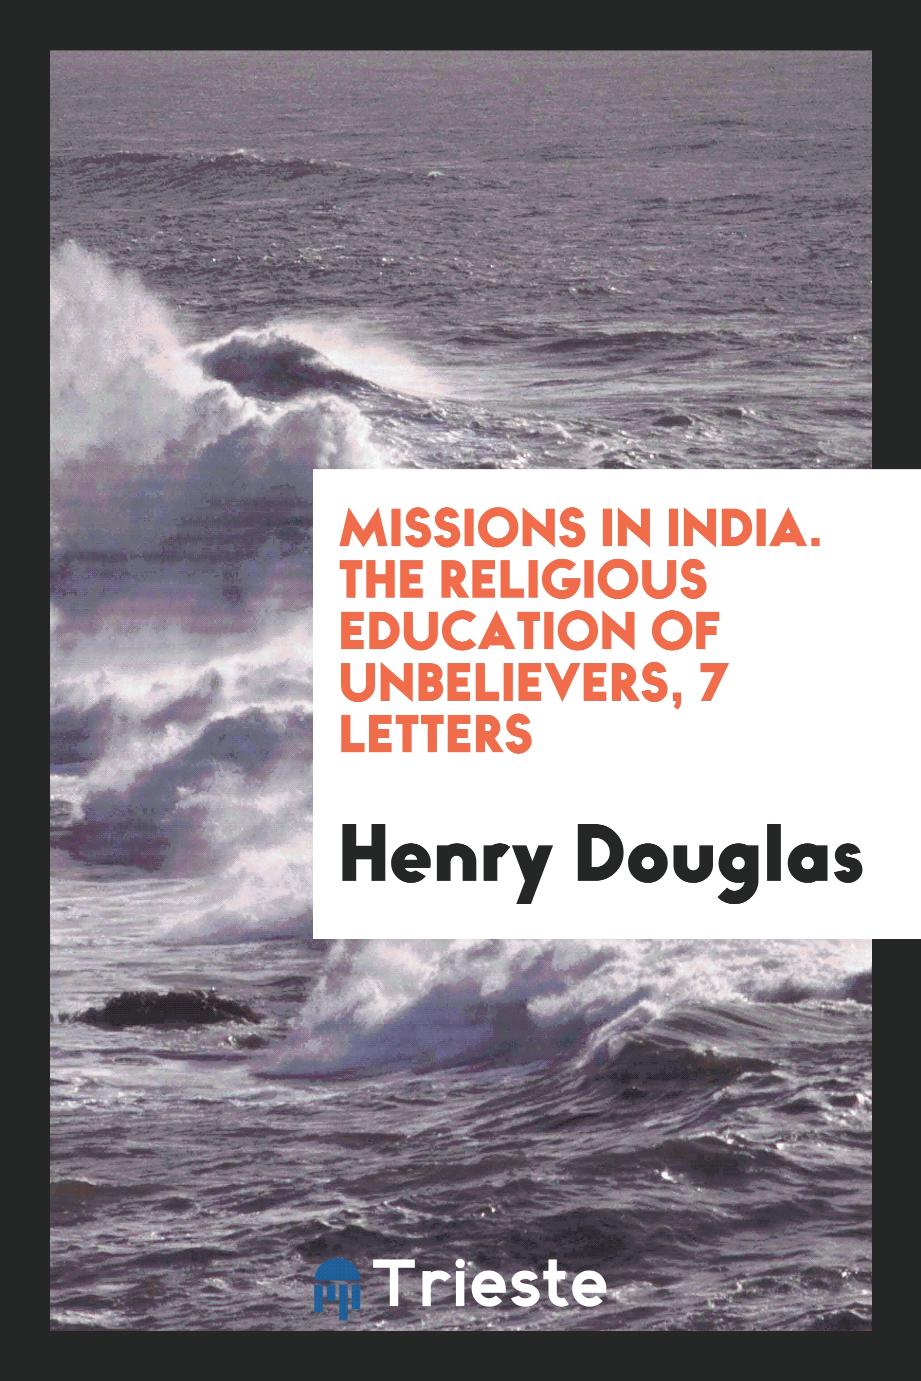 Missions in India. The religious education of unbelievers, 7 letters